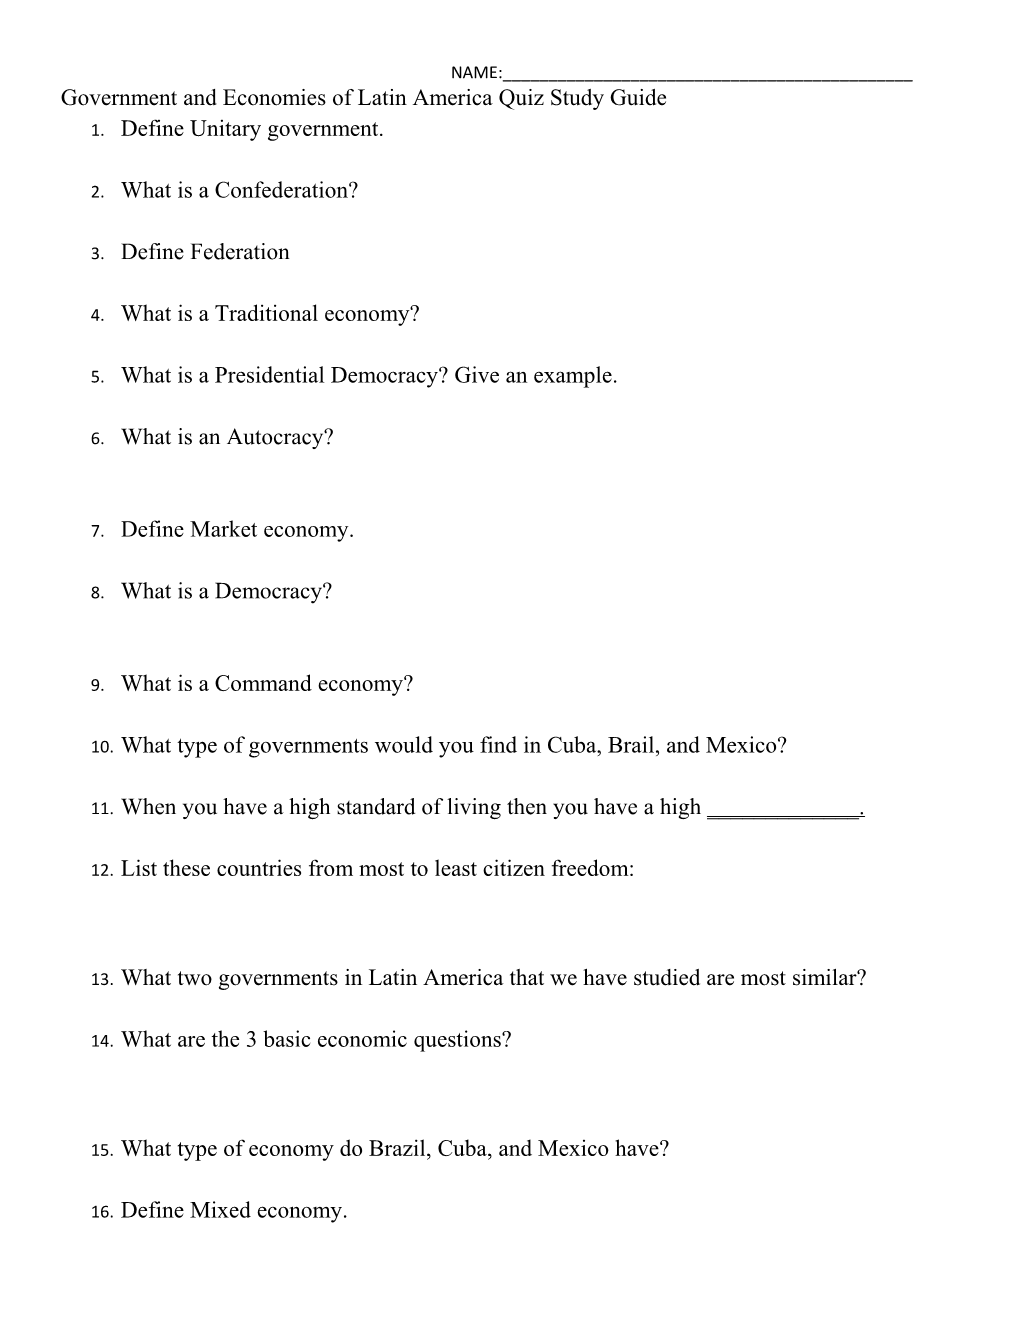 Government and Economies of Latin America Quiz Study Guide